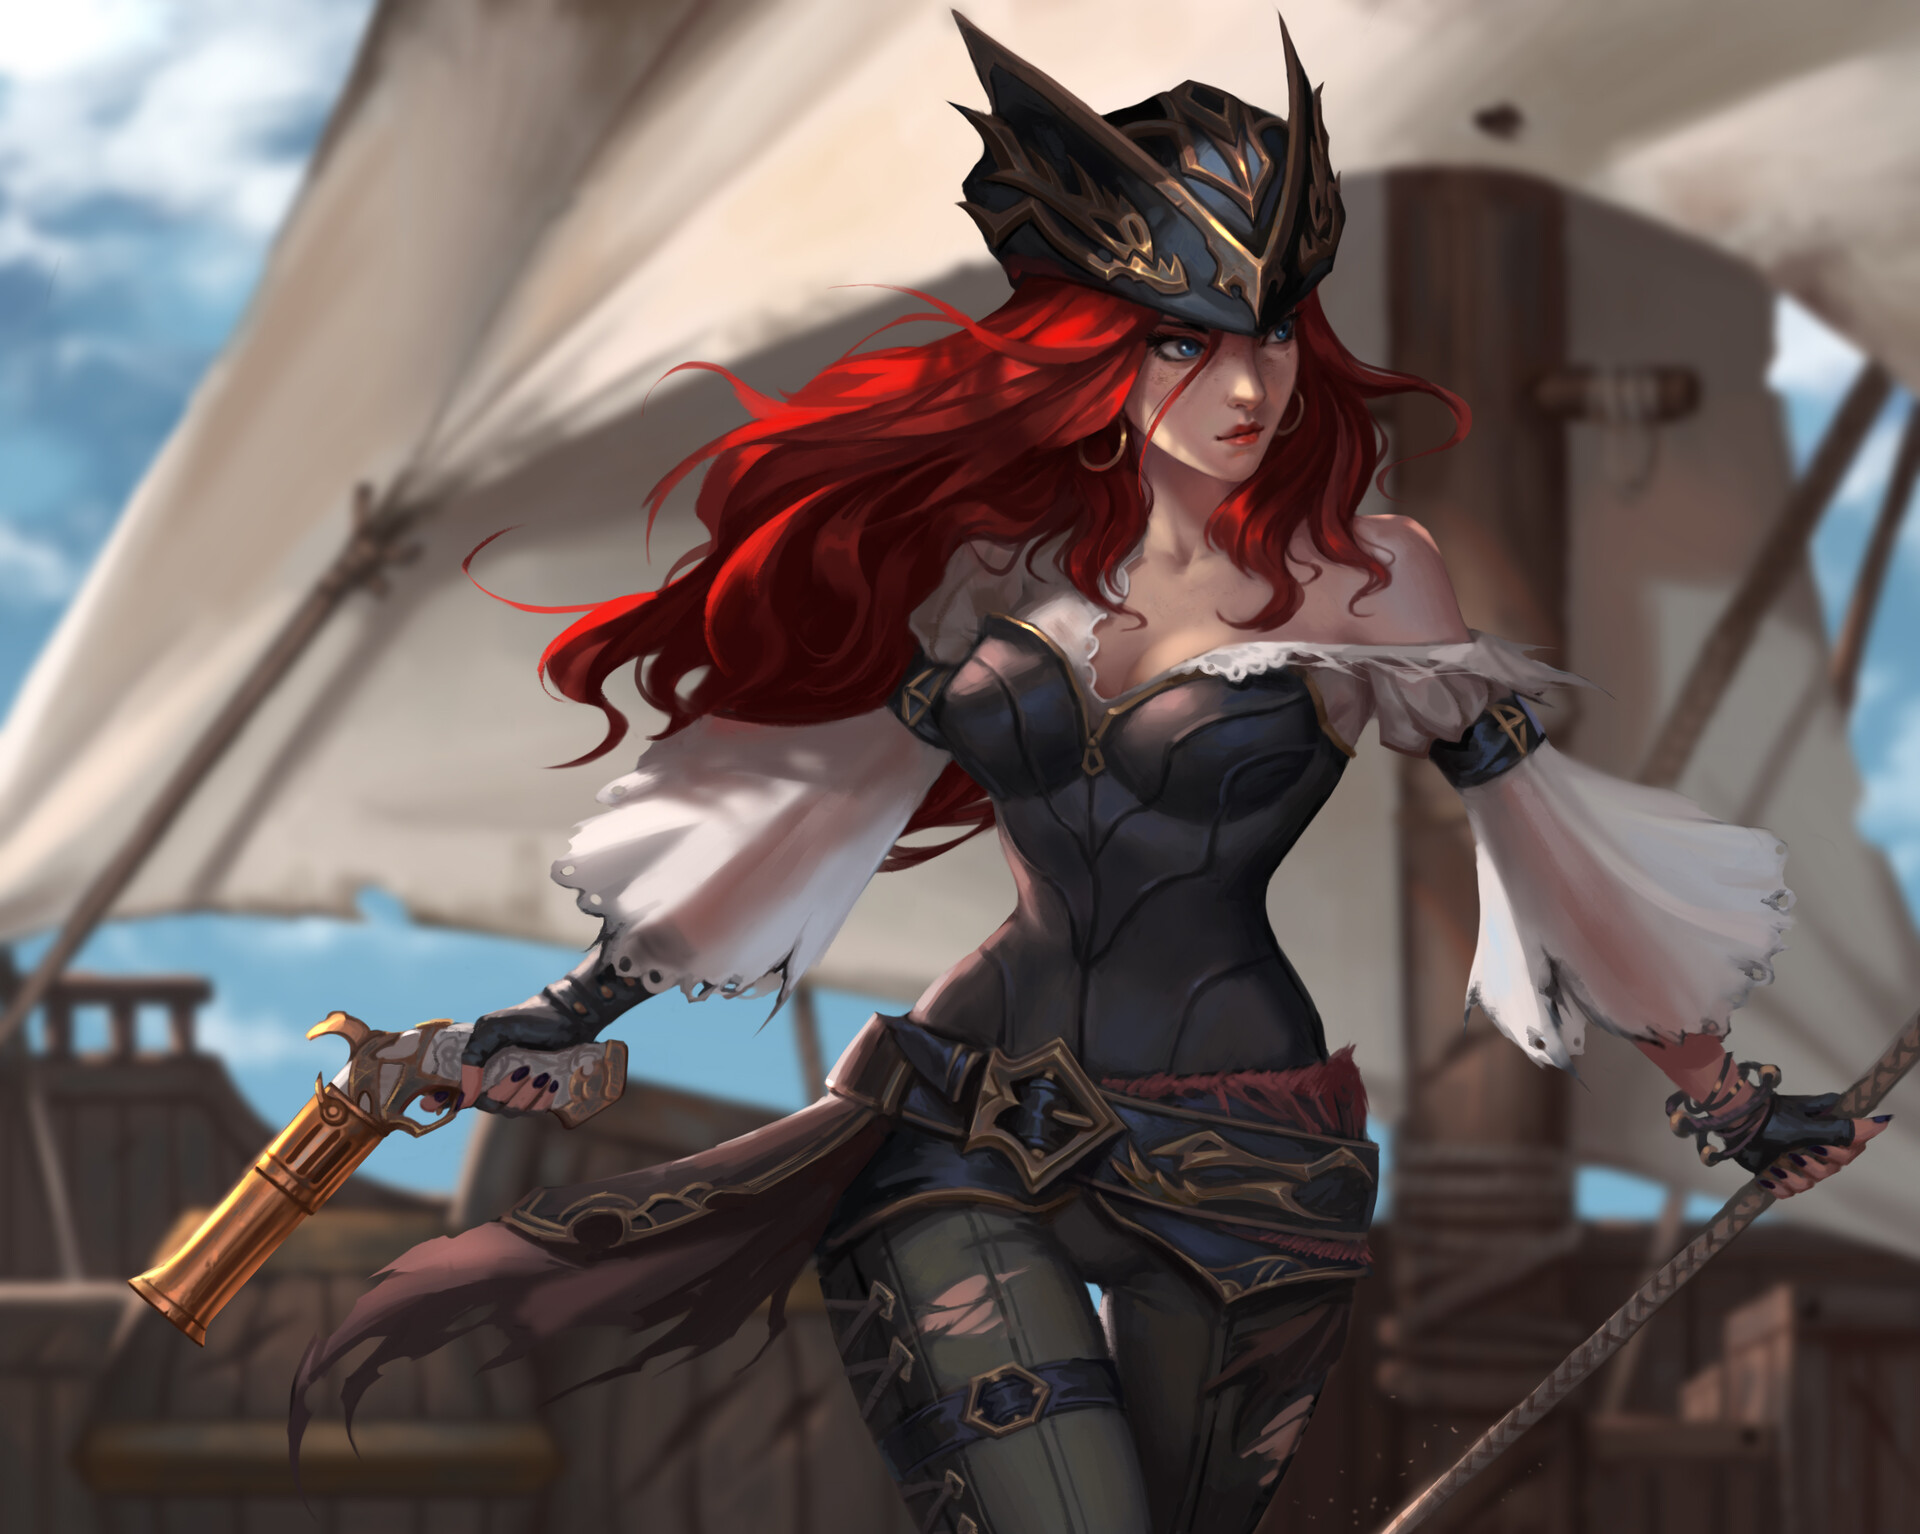 MISS fortune, 凌 天 宇.